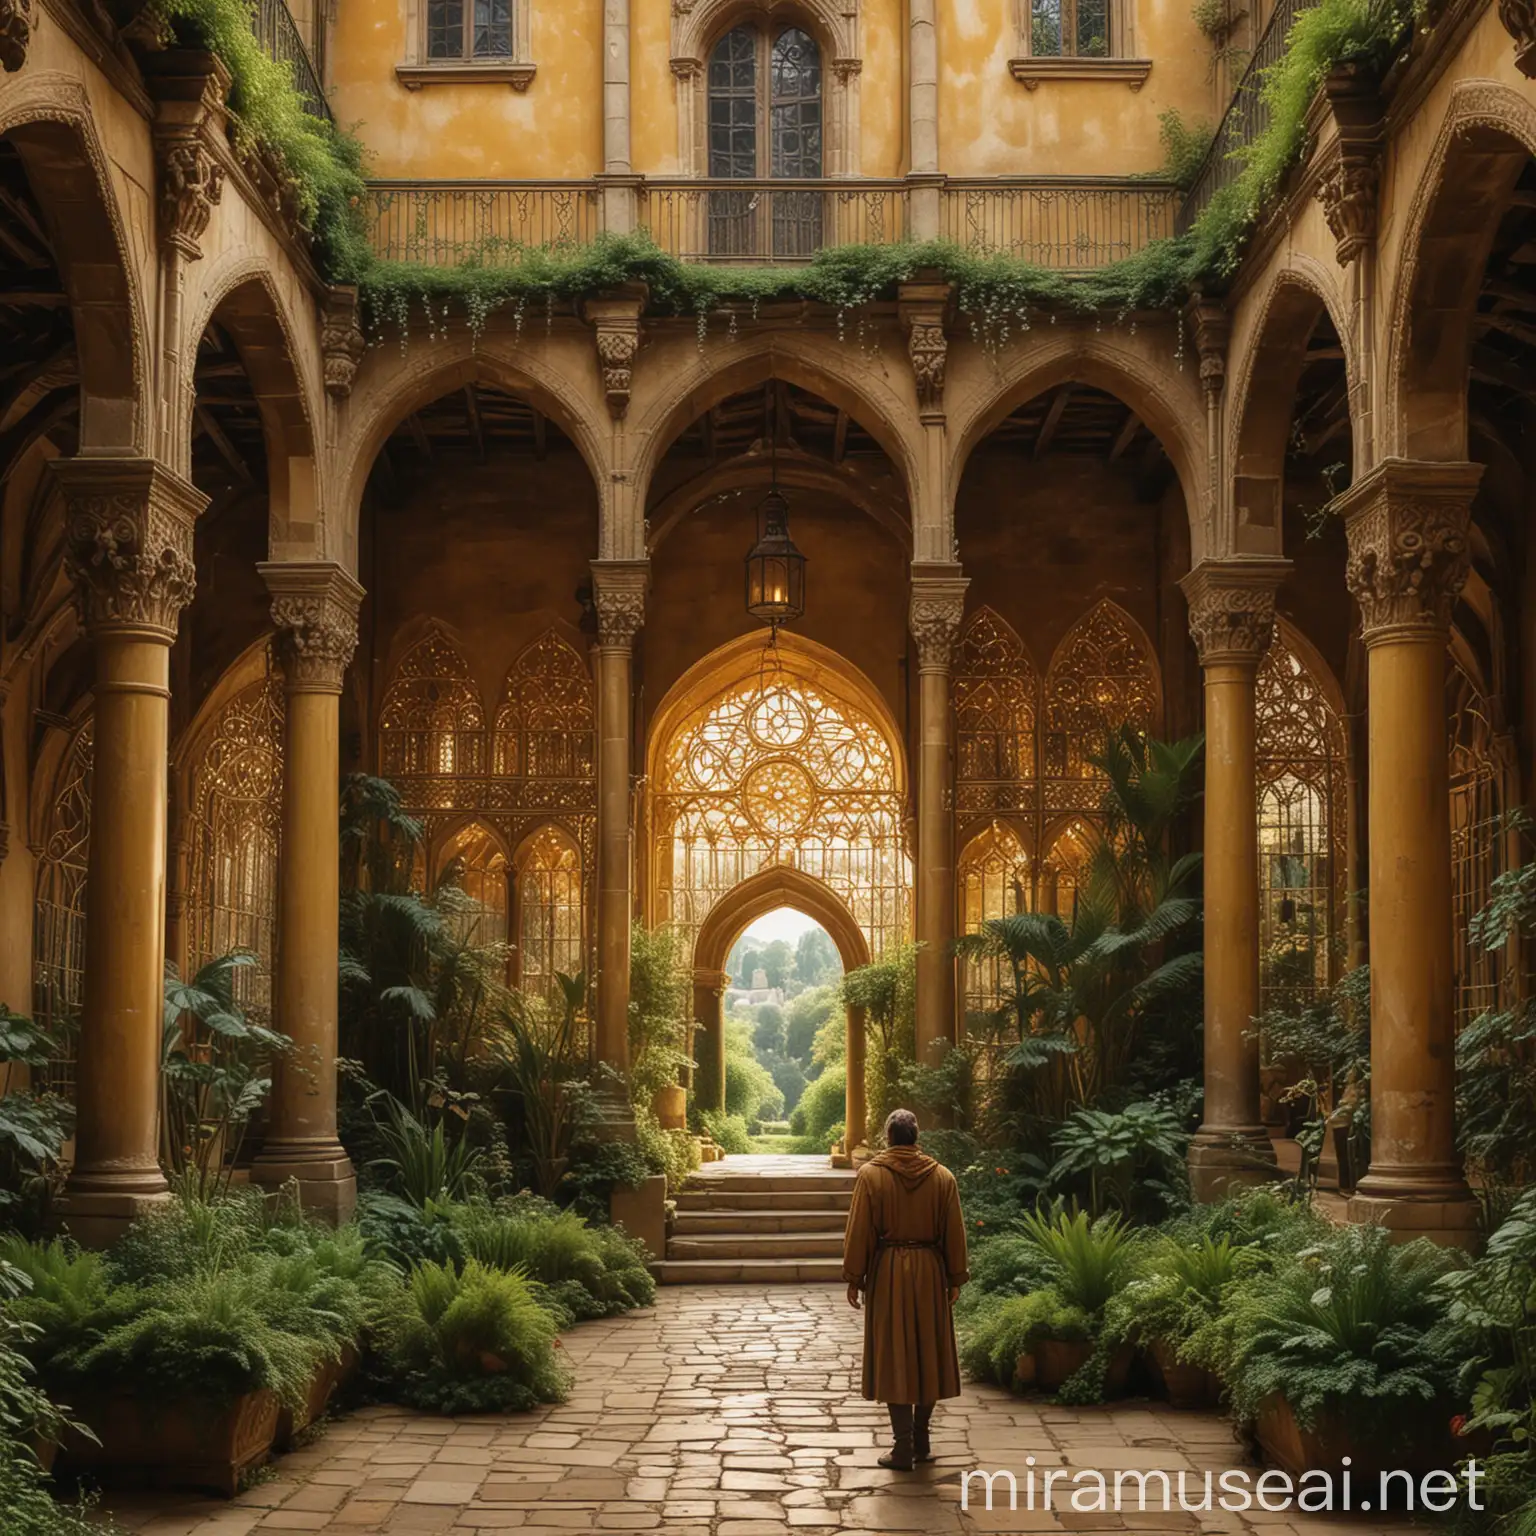 a medieveal man watching a vast structure with golden walls and crystal inlays, surrounded by lush gardens and courtyards full of life.